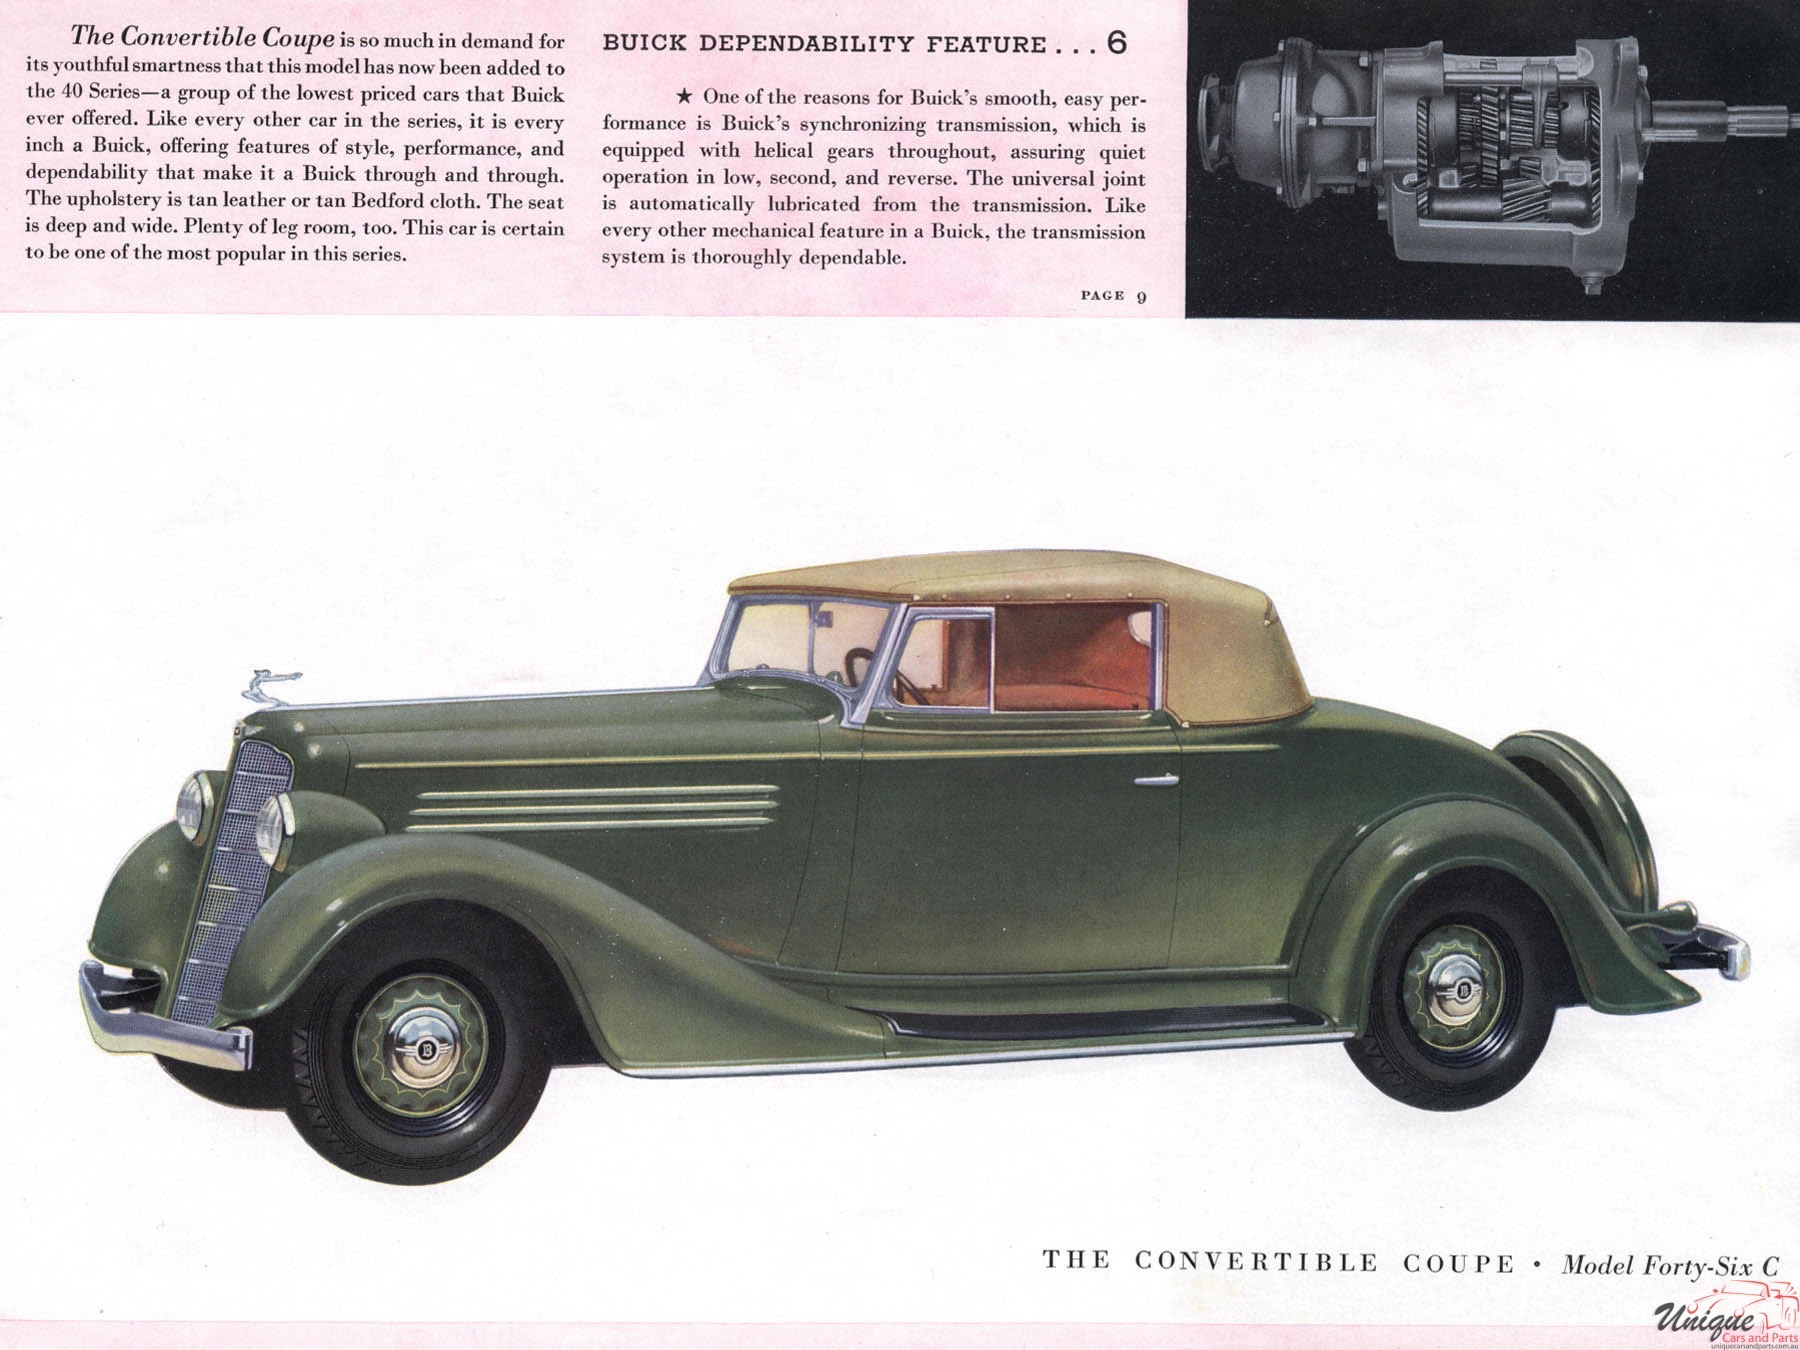 1935 Buick Brochure Page 10